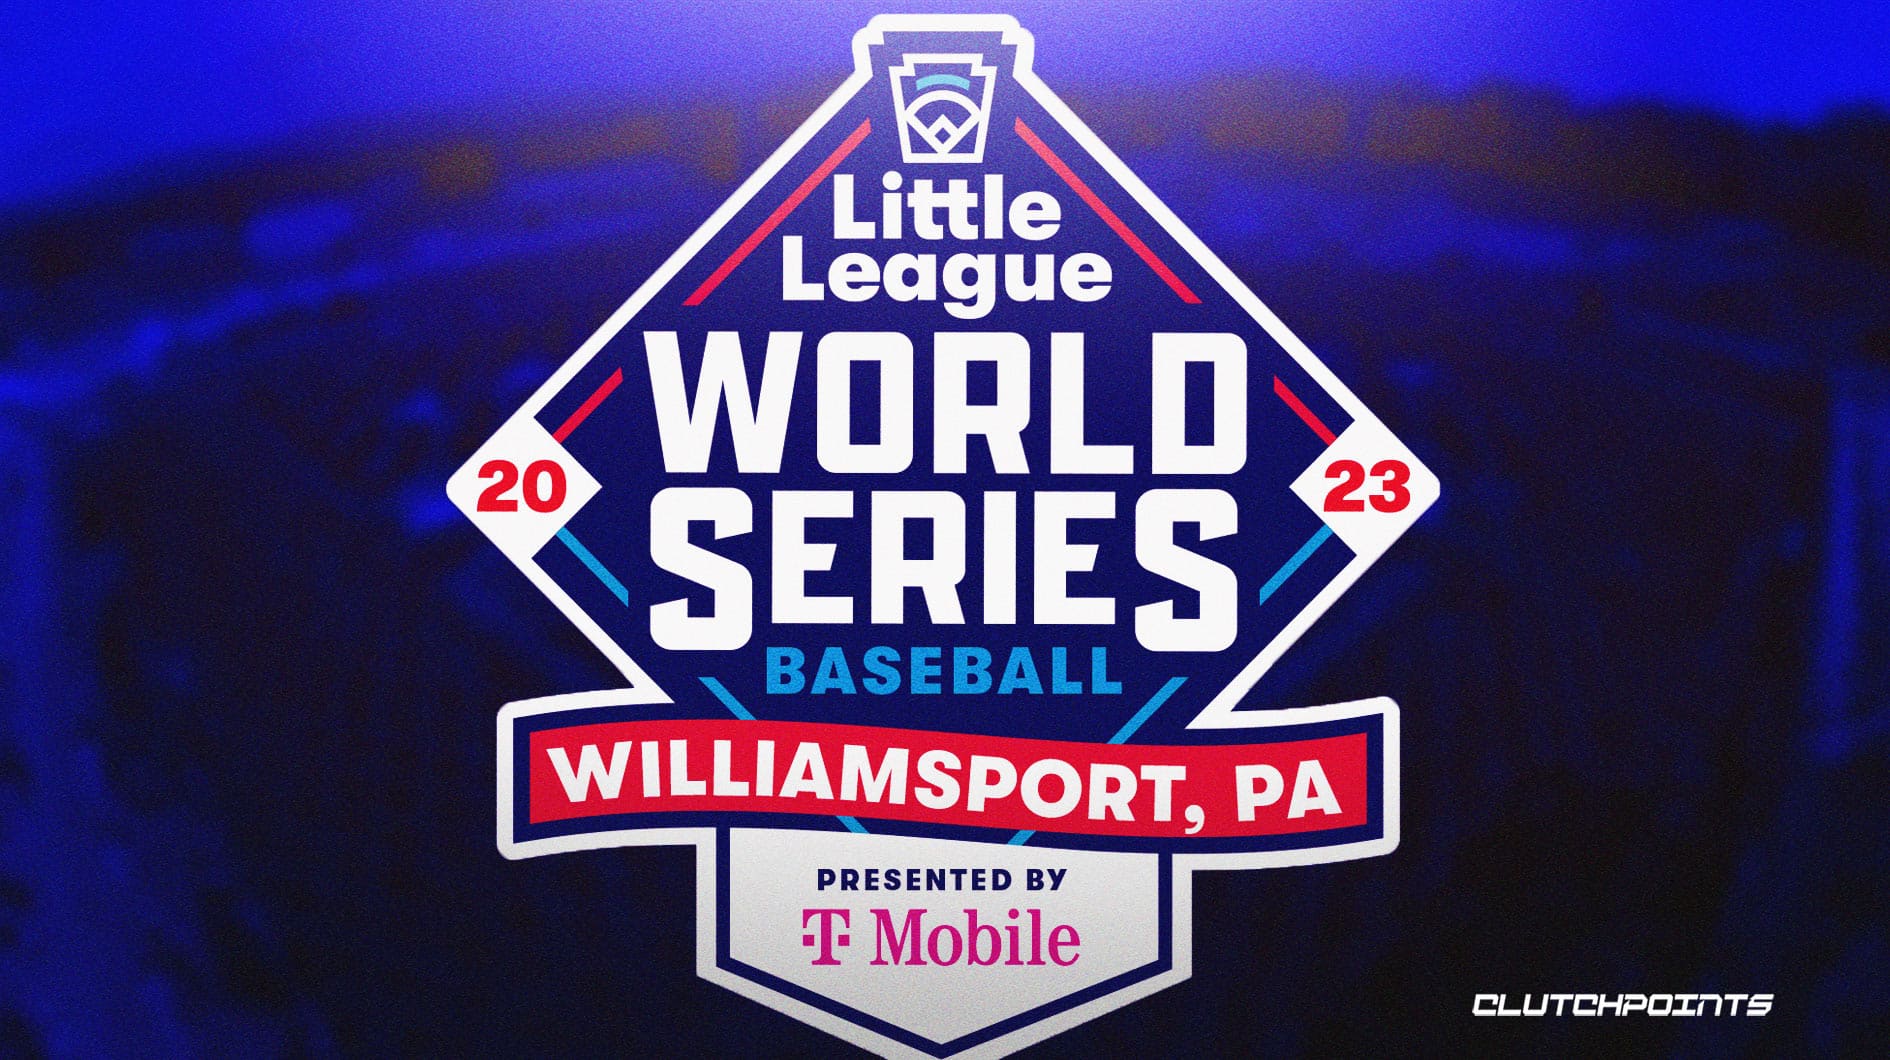 Little League World Series Championship How to watch live stream, date, time, TV